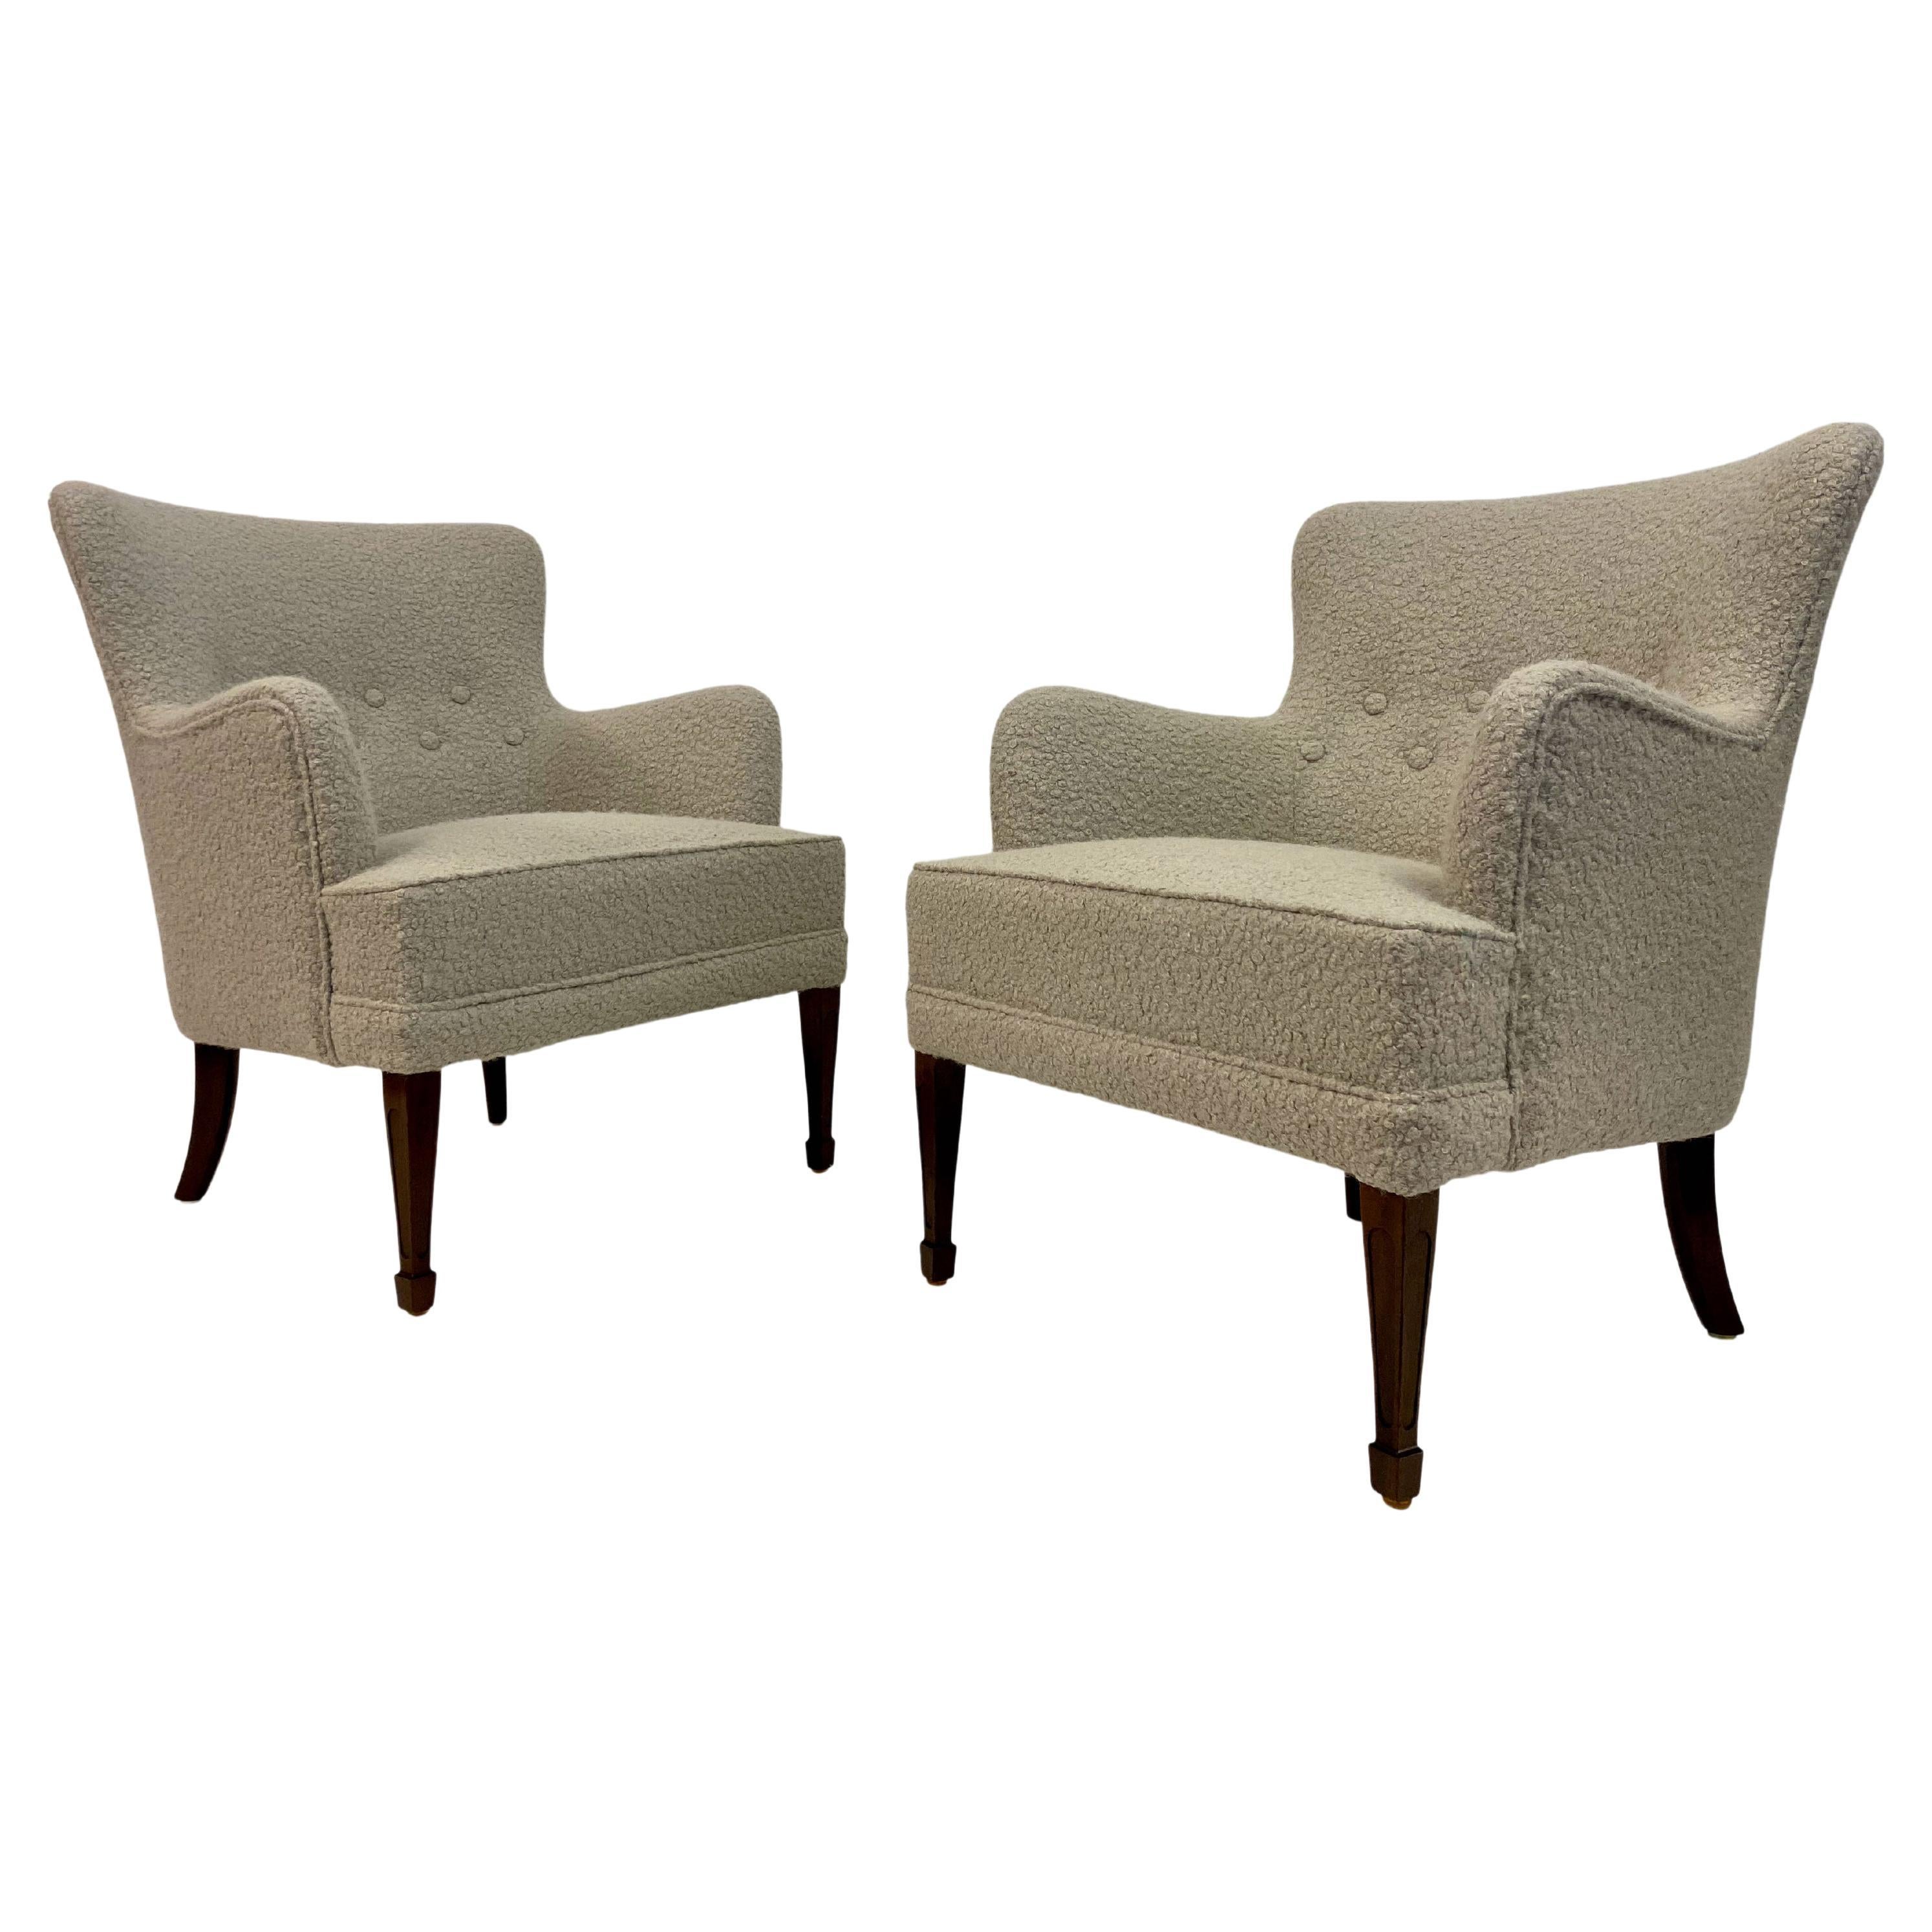 Pair of 1950s Danish Armchairs by Frits Henningsen For Sale